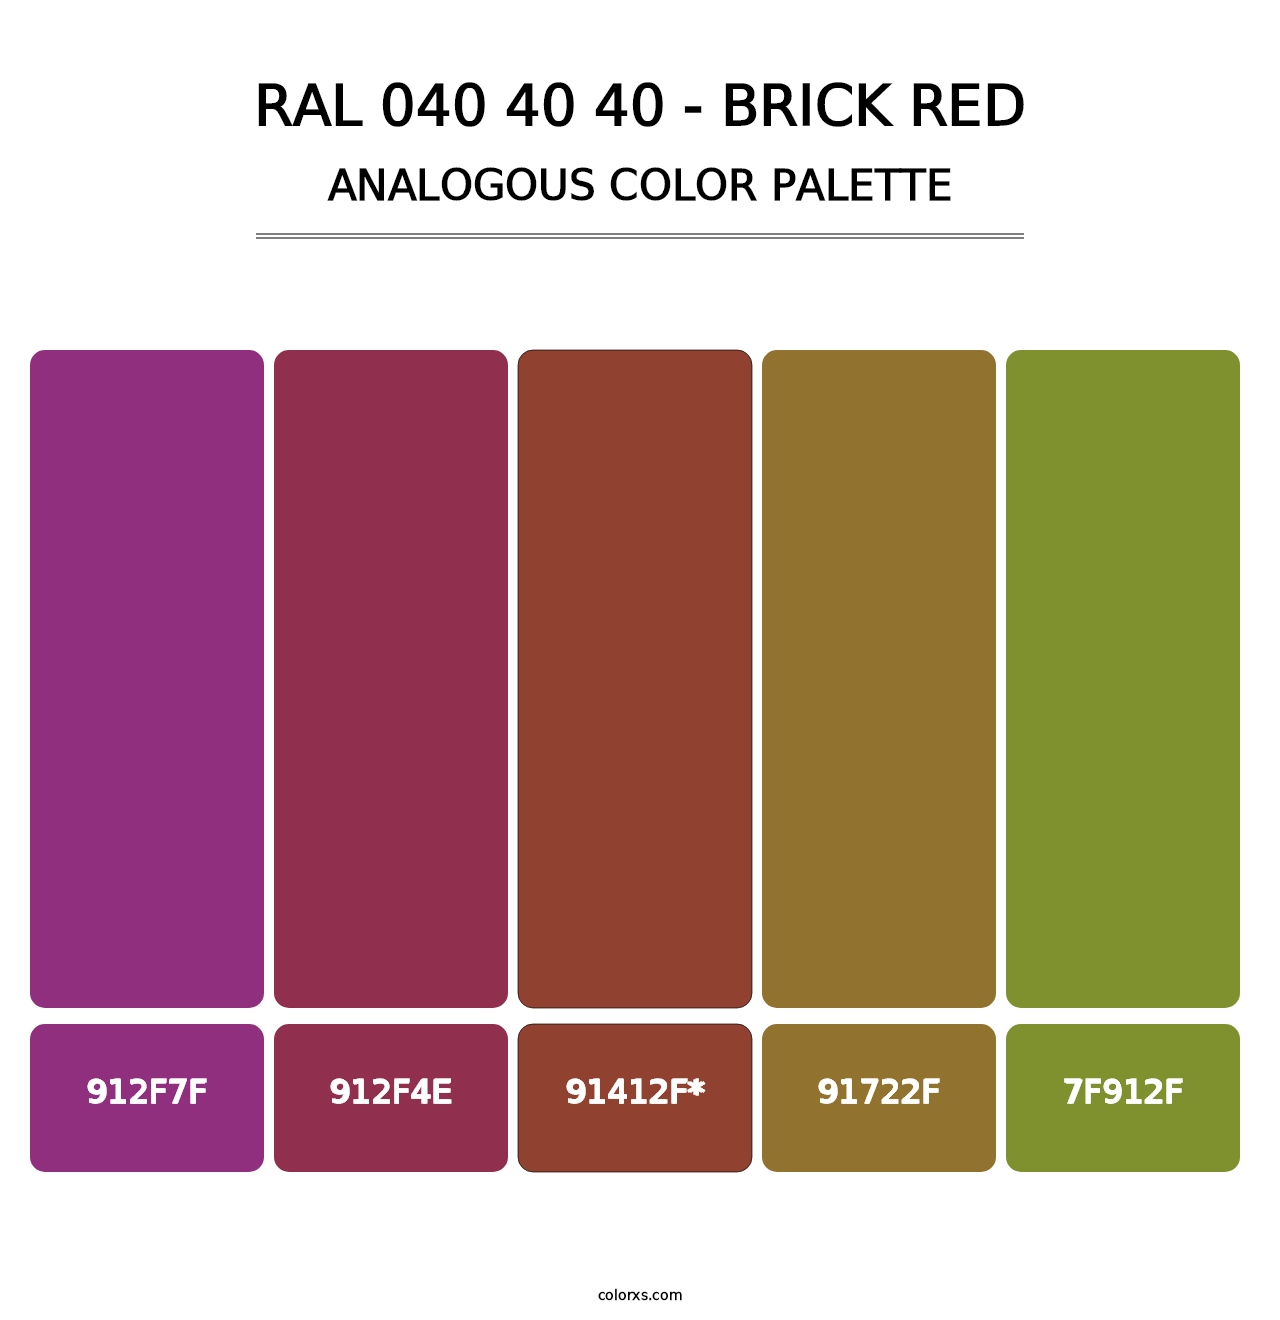 RAL 040 40 40 - Brick Red - Analogous Color Palette